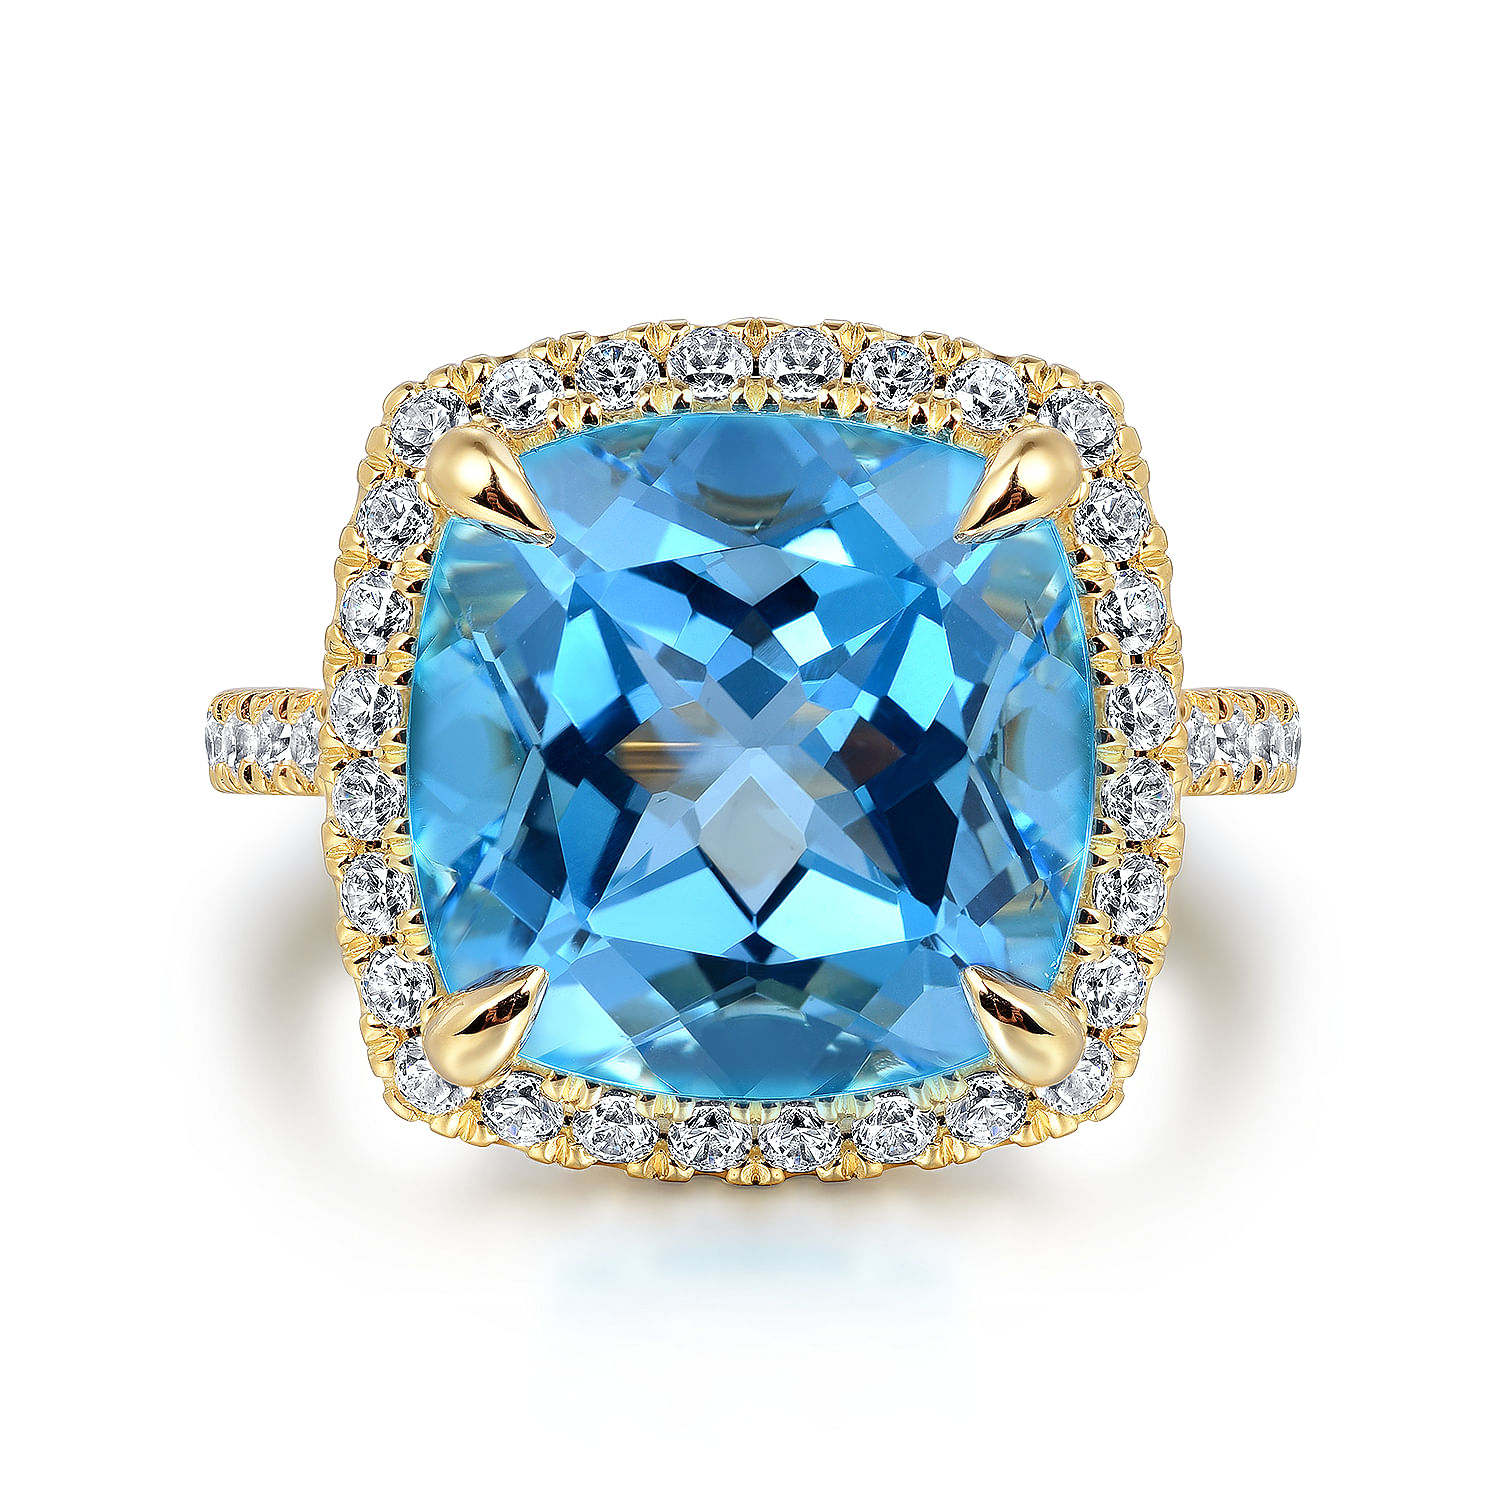 Gabriel - 14K Yellow Gold Diamond and Blue Topaz Cushion Cut Ladies Ring With Flower Pattern Gallery